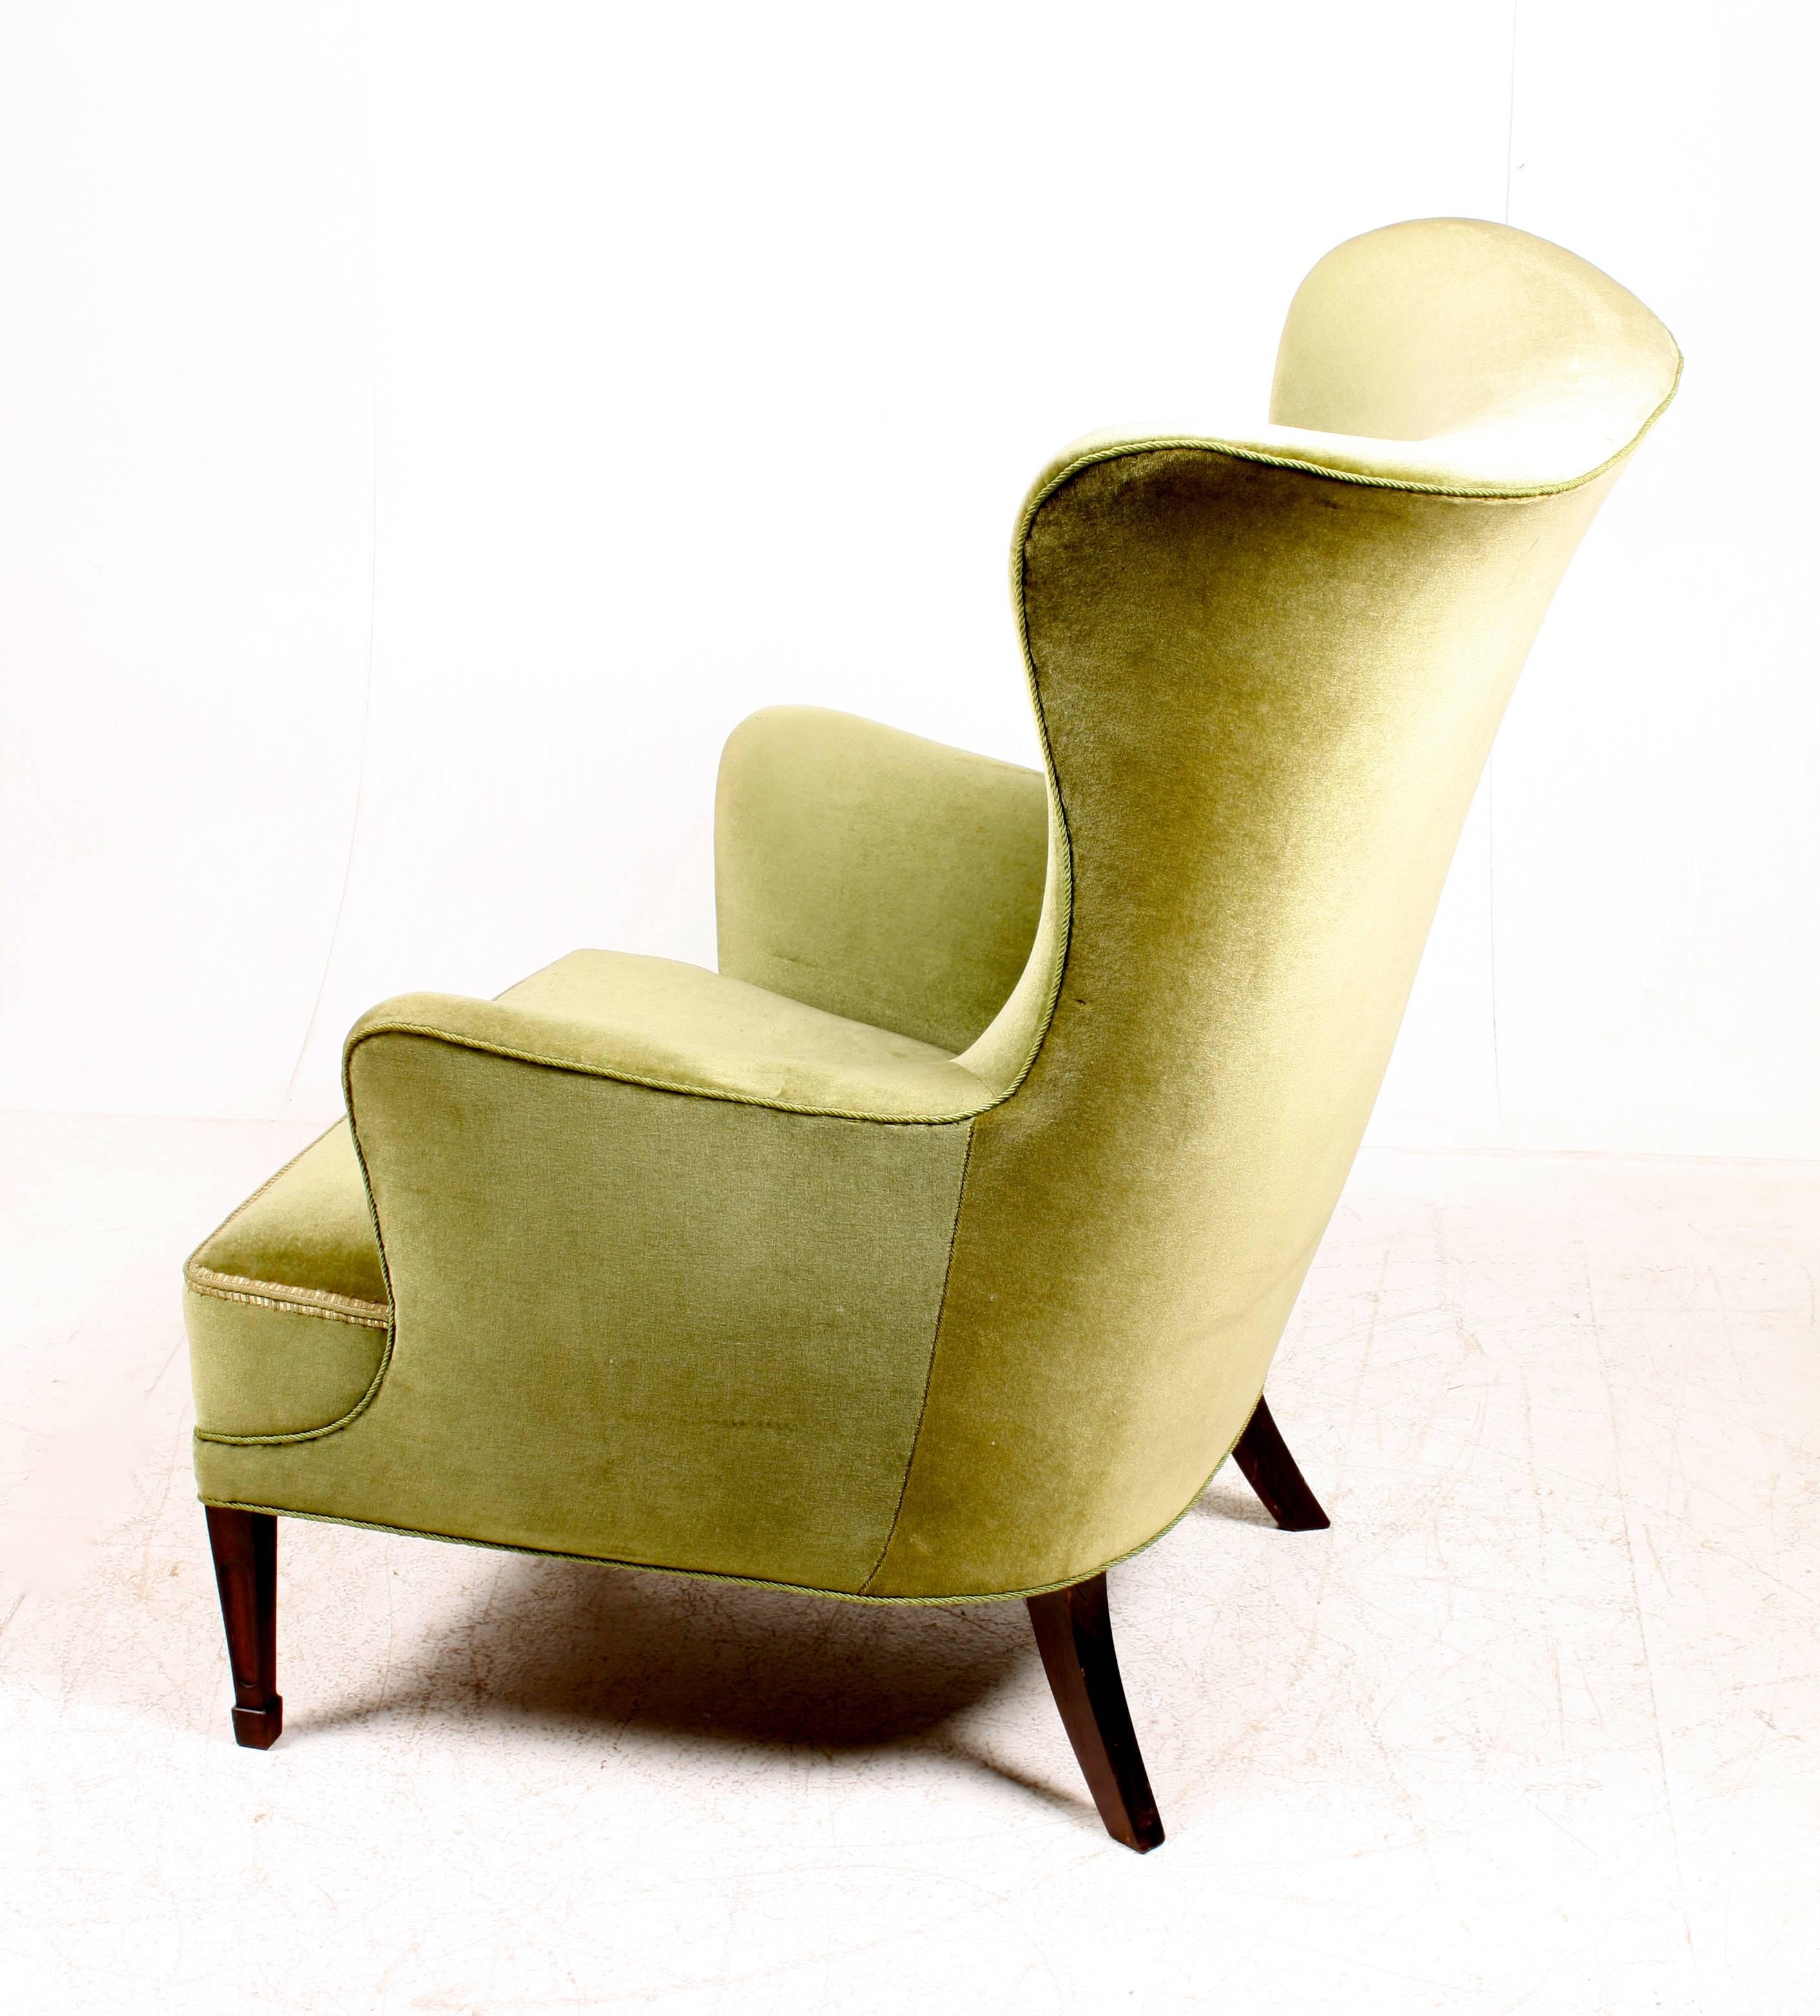 Lounge chair upholstered in velour, designed and made in the 1940s by Danish designer Frits Henningsen. Great original condition.